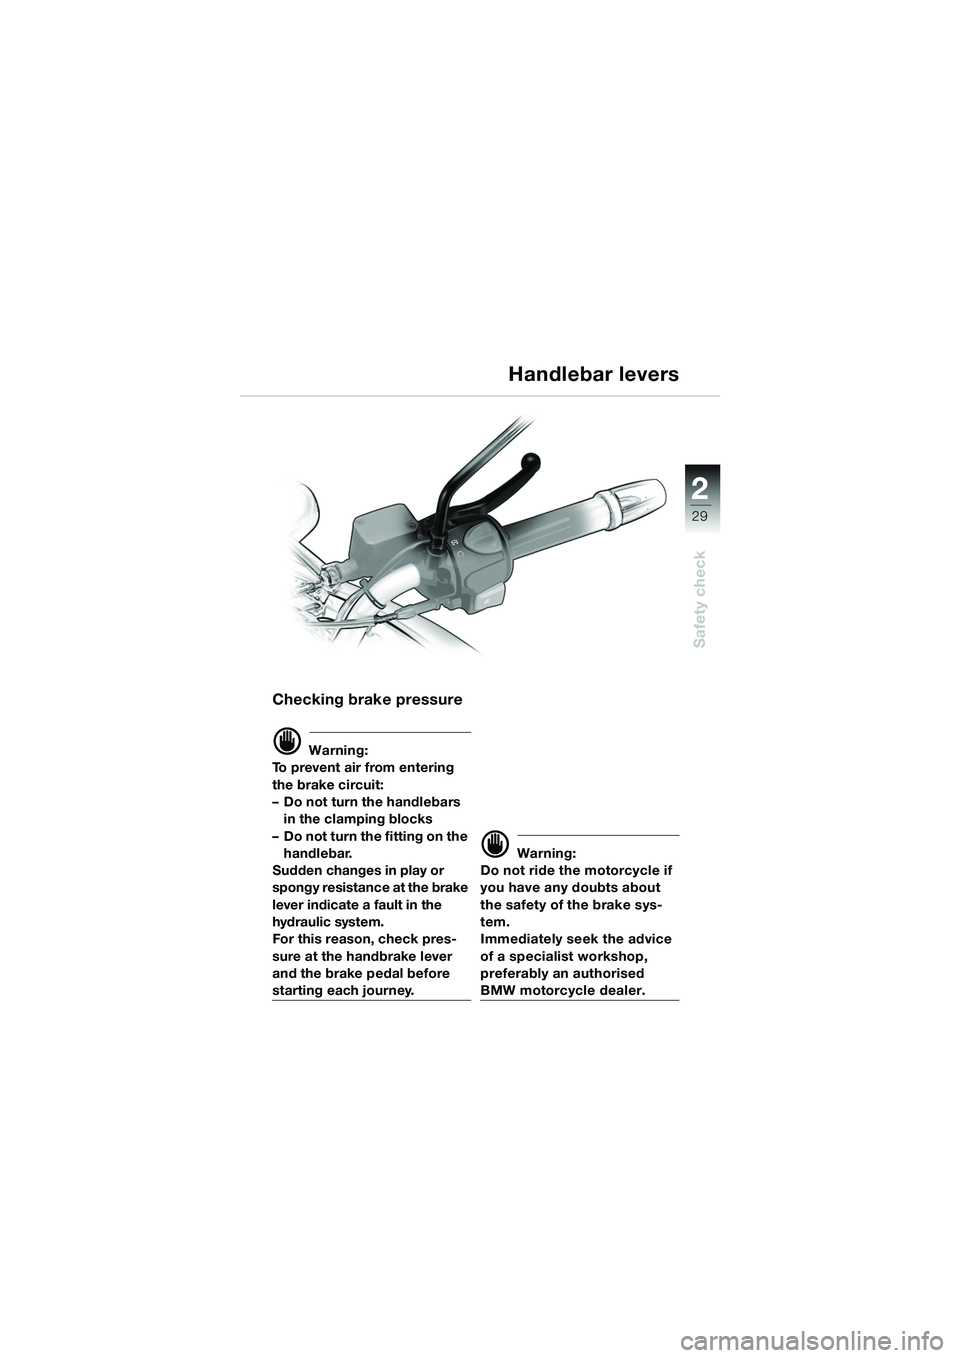 BMW MOTORRAD F 650 CS 2003  Riders Manual (in English) 1
29
Safety check
2
Checking brake pressure
d Warning:
To prevent air from entering 
the brake circuit: 
– Do not turn the handlebars  in the clamping blocks
– Do not turn the fitting on the  hand